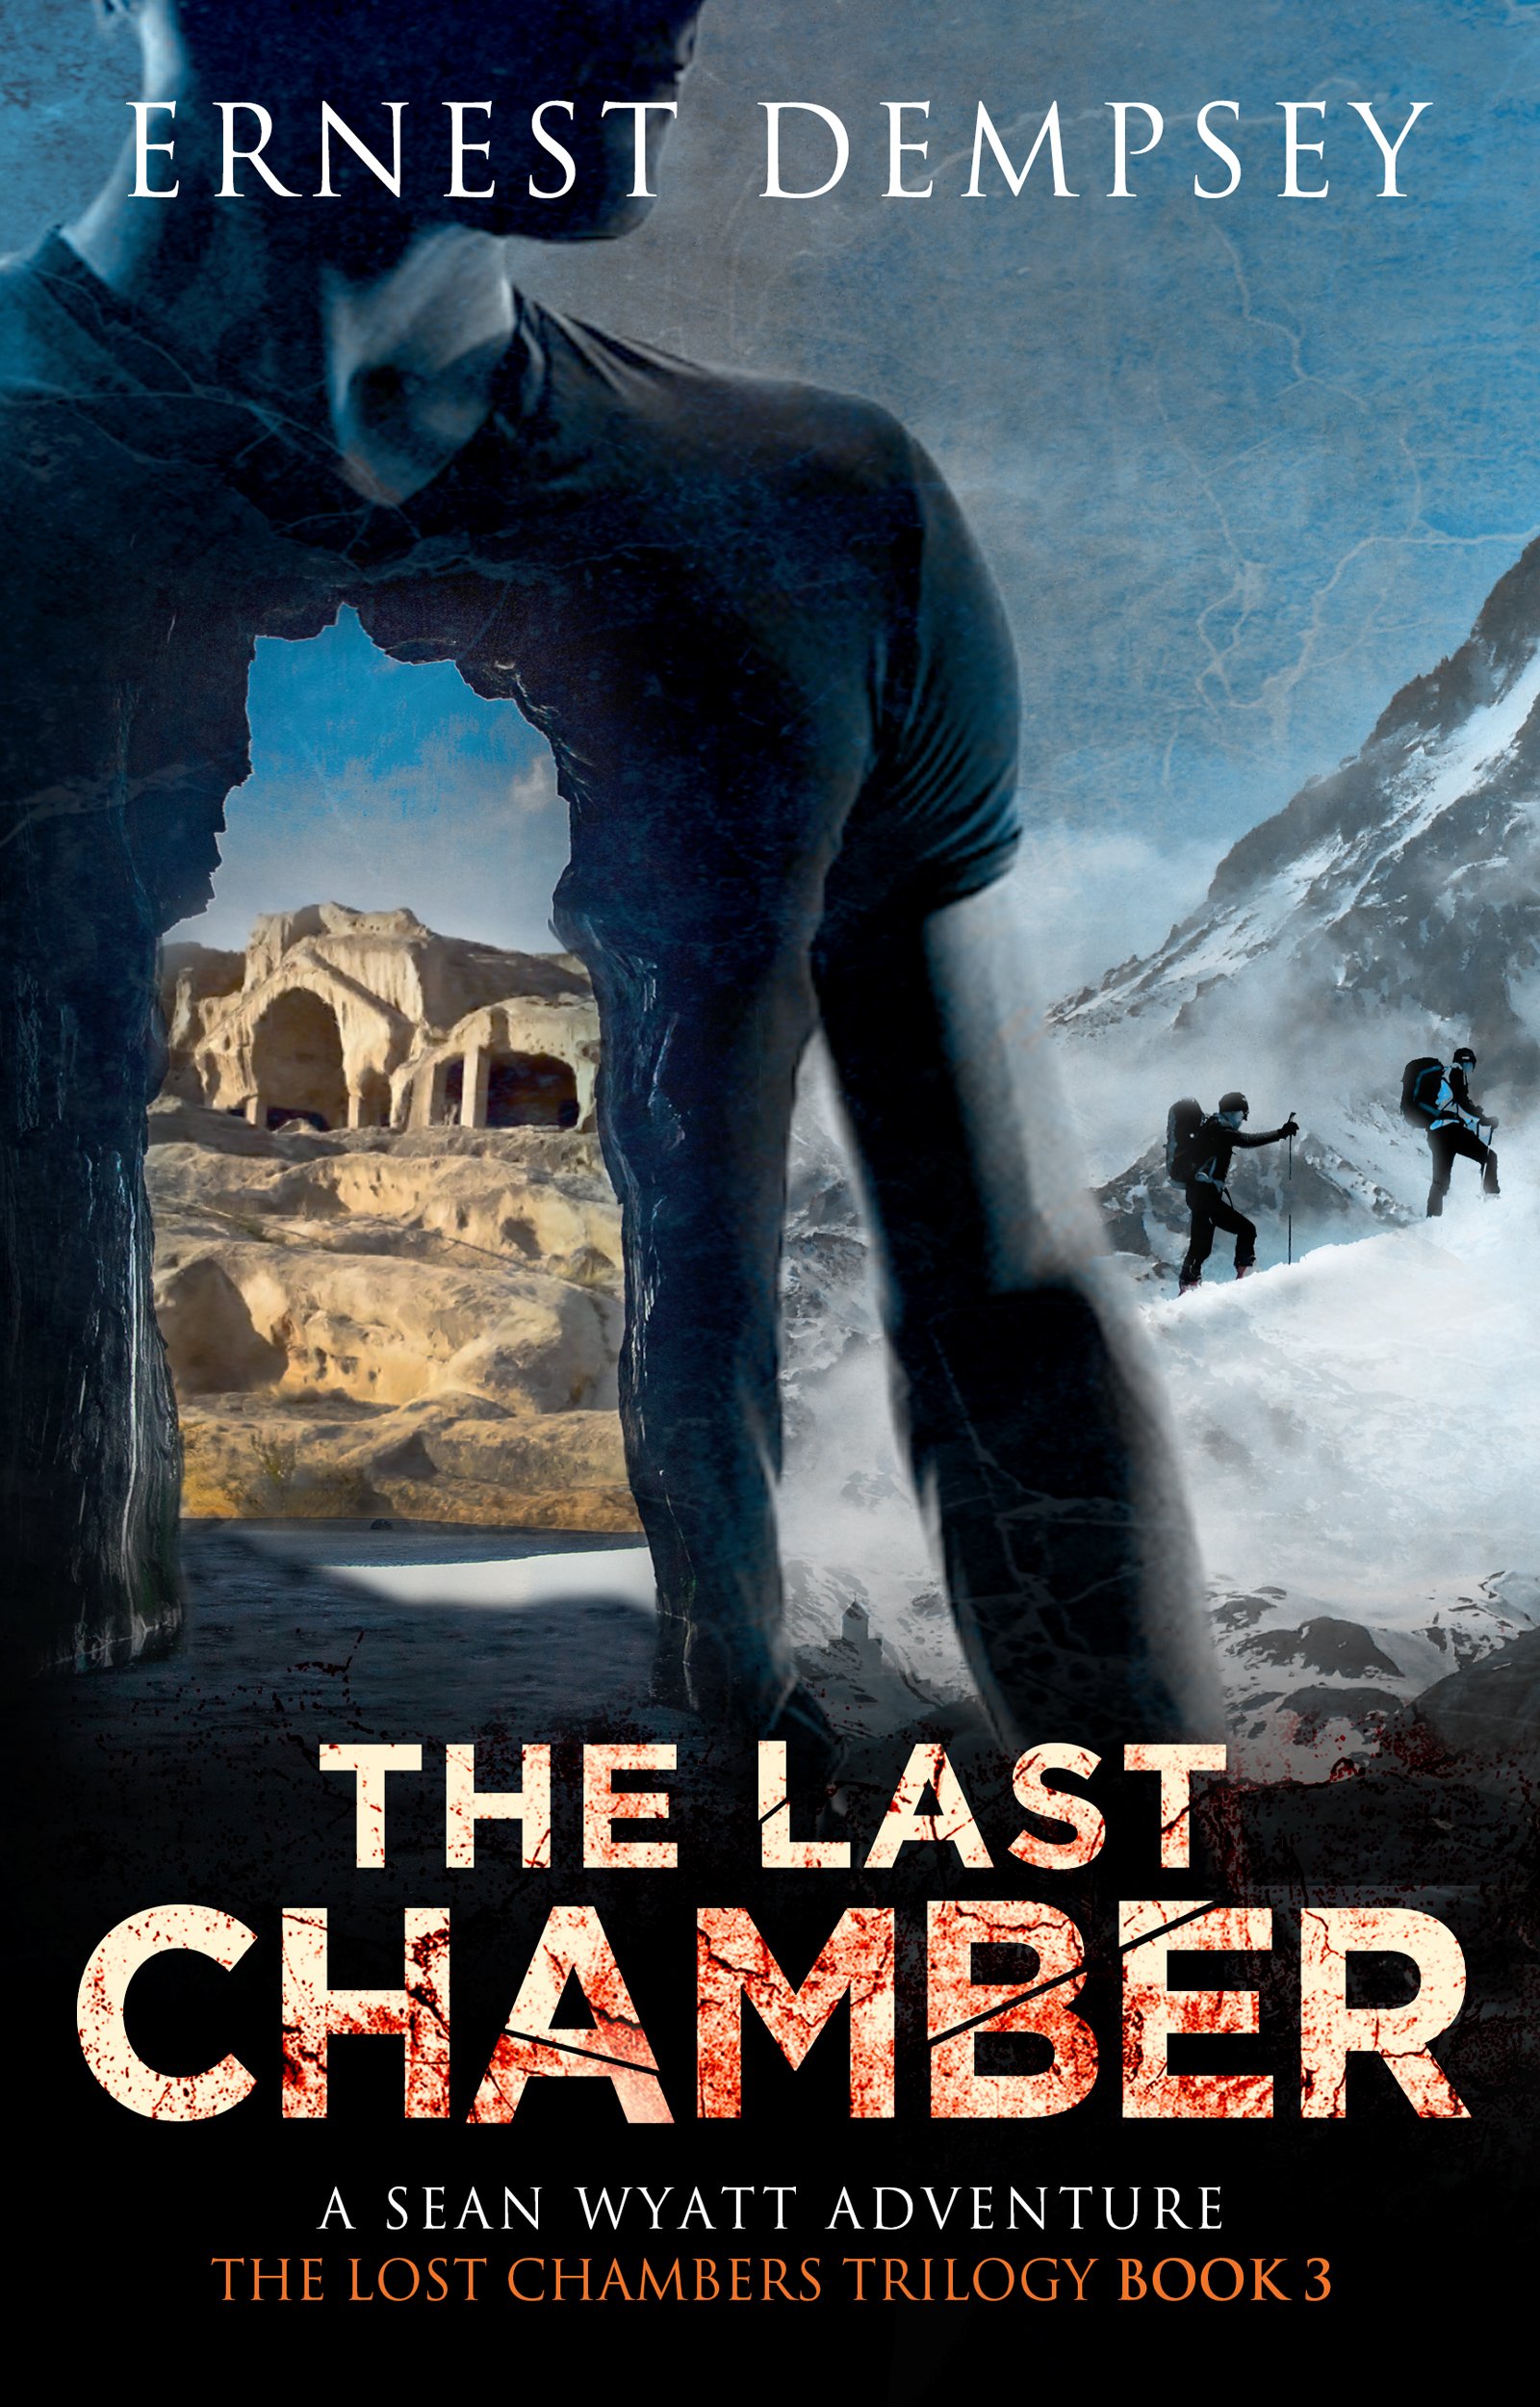 The Last Chamber New Ebook Cover.jpg